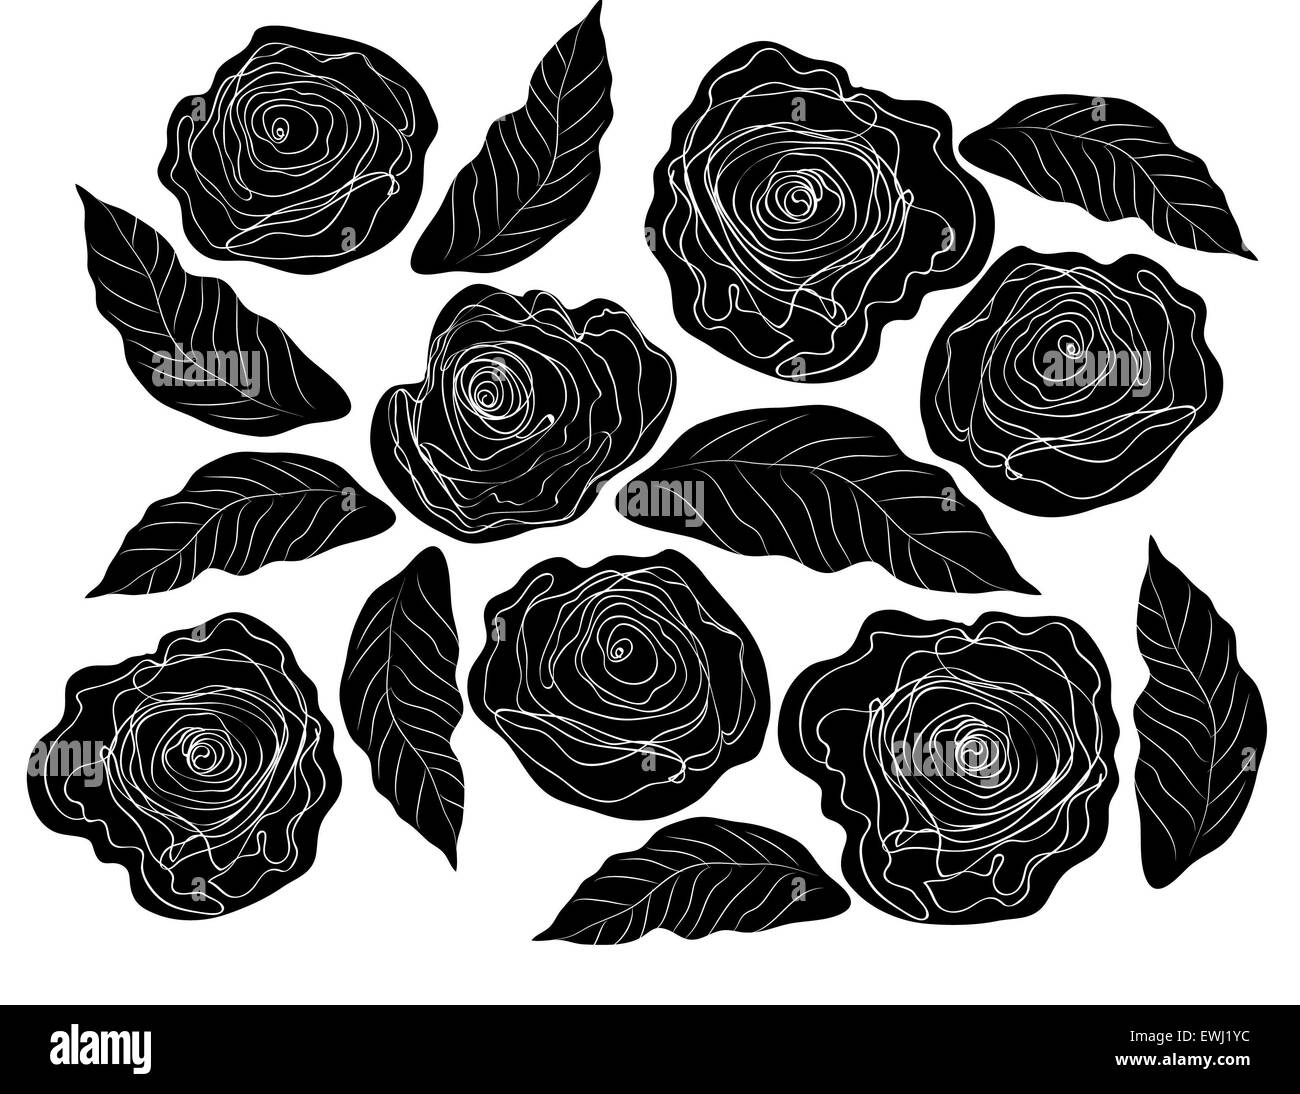 Classic and original floral composition in black and white roses to celebrate love Stock Photo